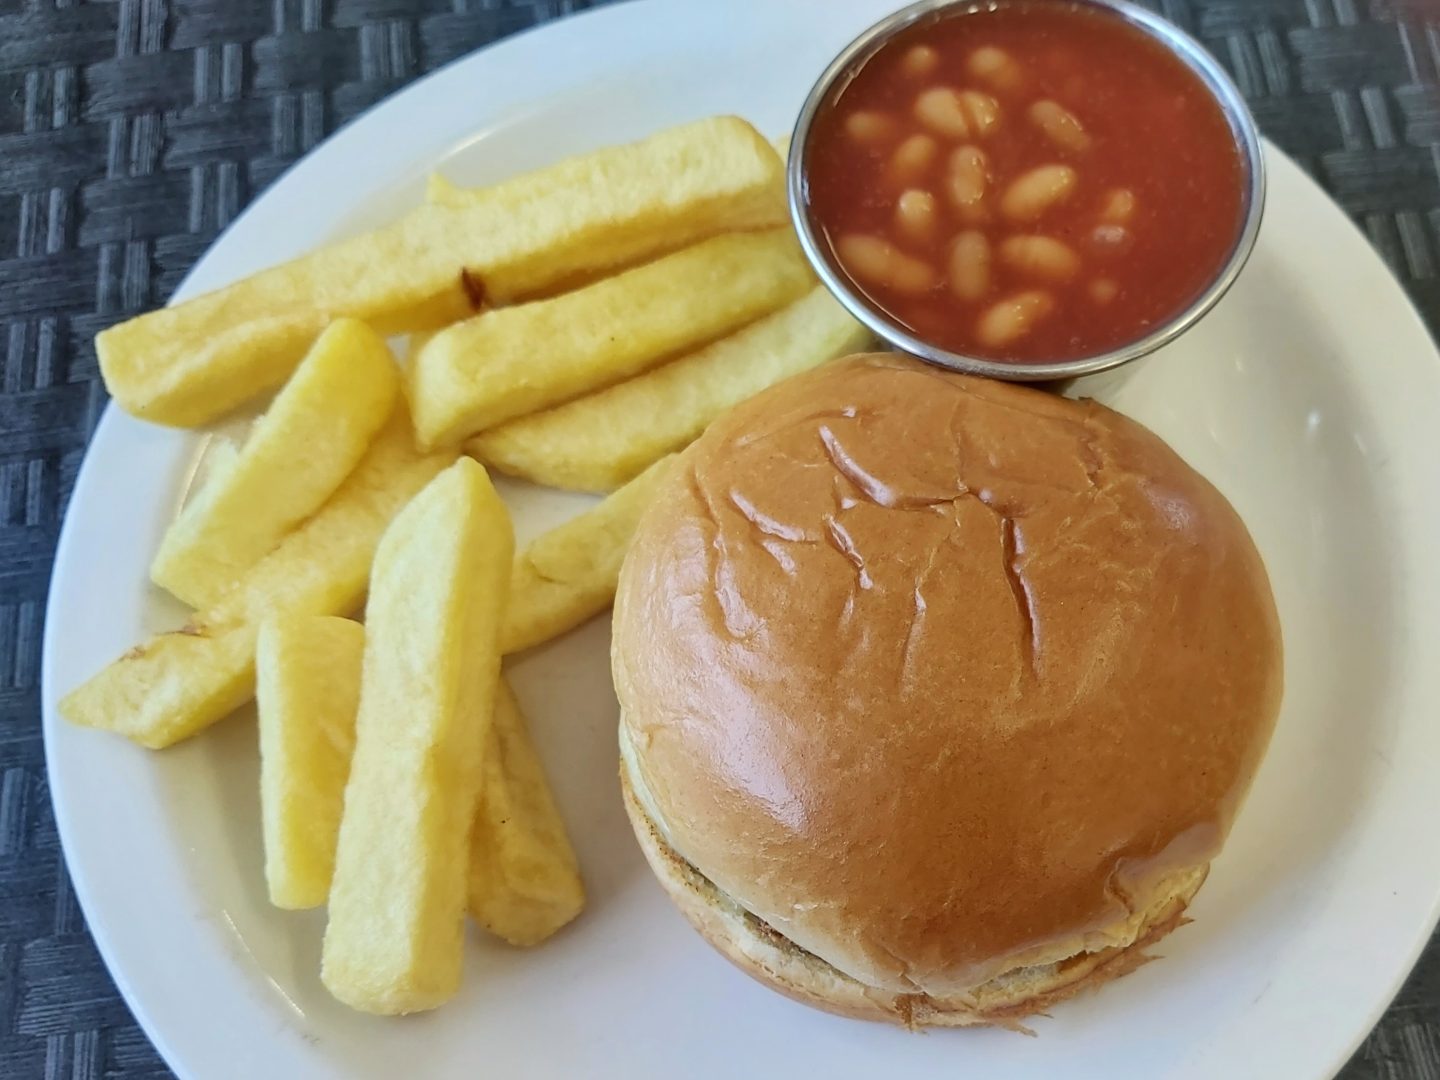 Kids veggie cheeseburger with chips and beans